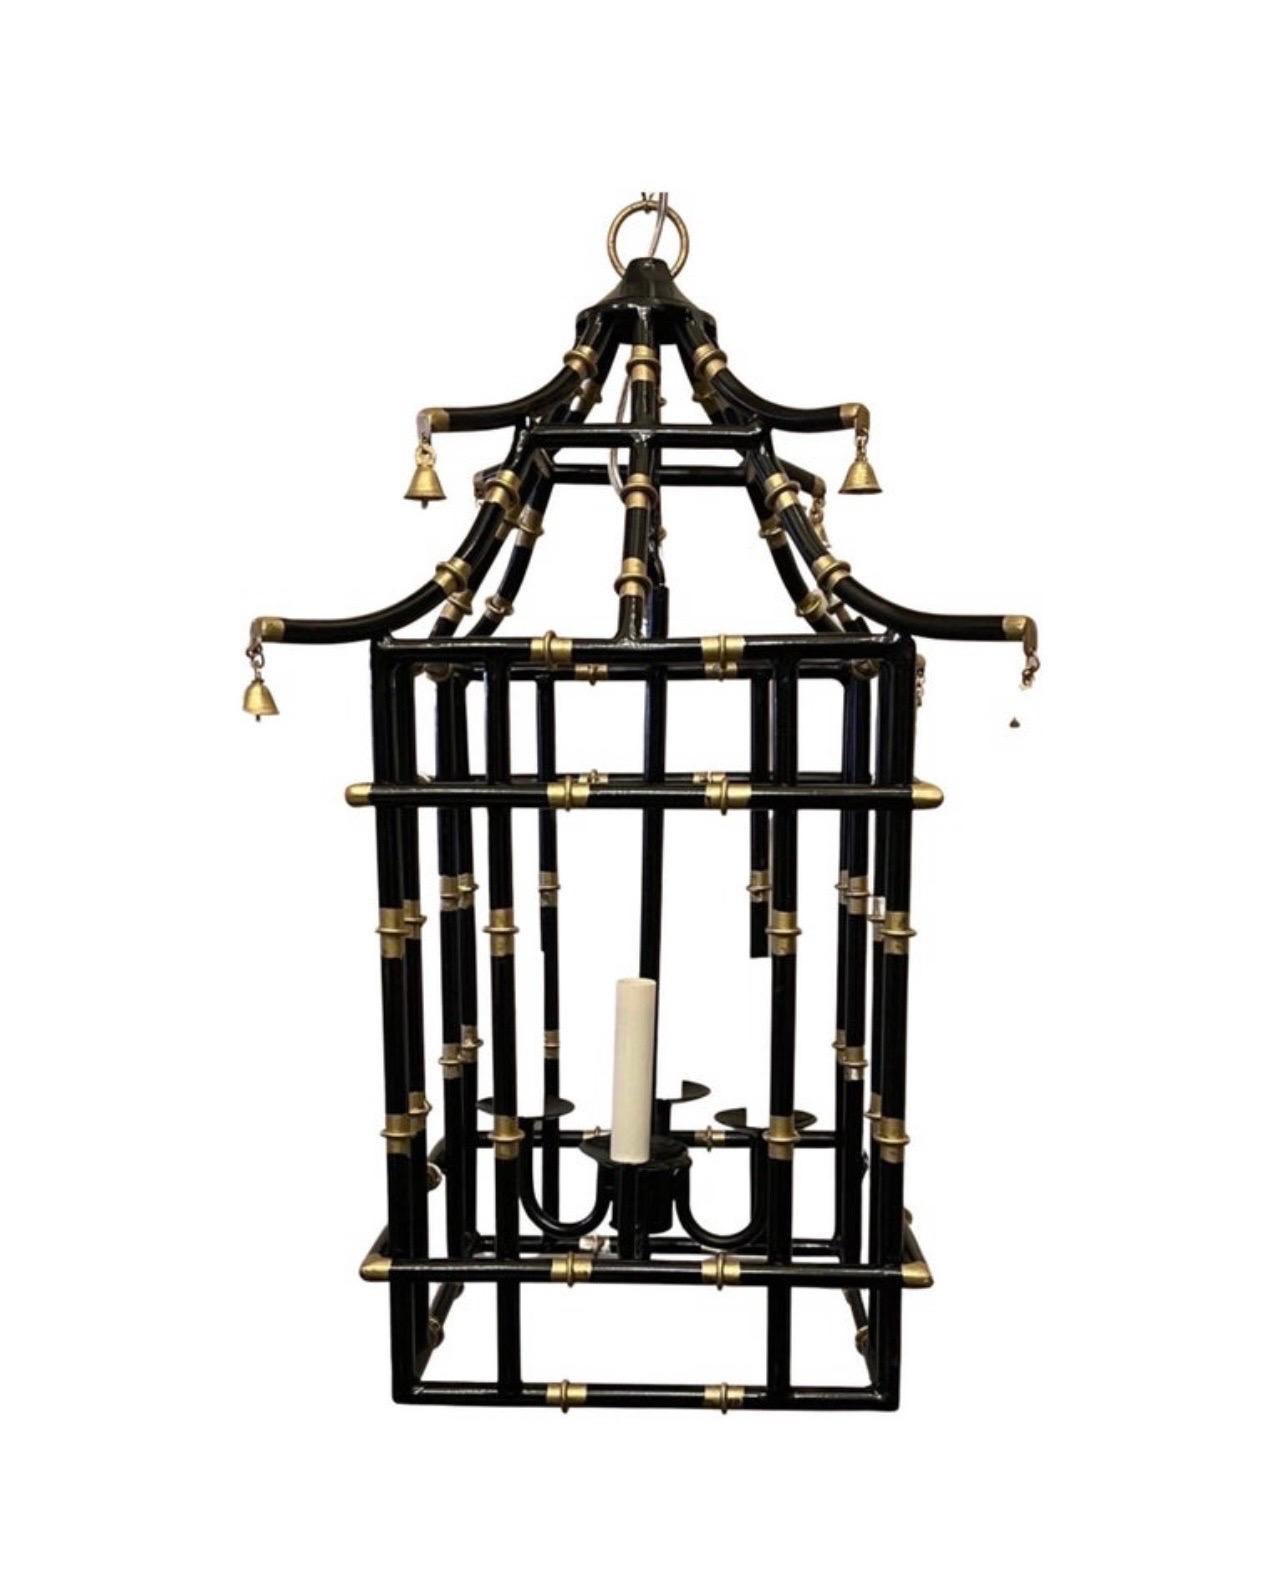 A wonderful medium sized black & gold gilt pagoda bamboo form chinoiserie lantern fixture with 4 candelabra light cluster, each socket with a max of 40 watts.

Rewired and ready to install with chain canopy and mounting hardware.

